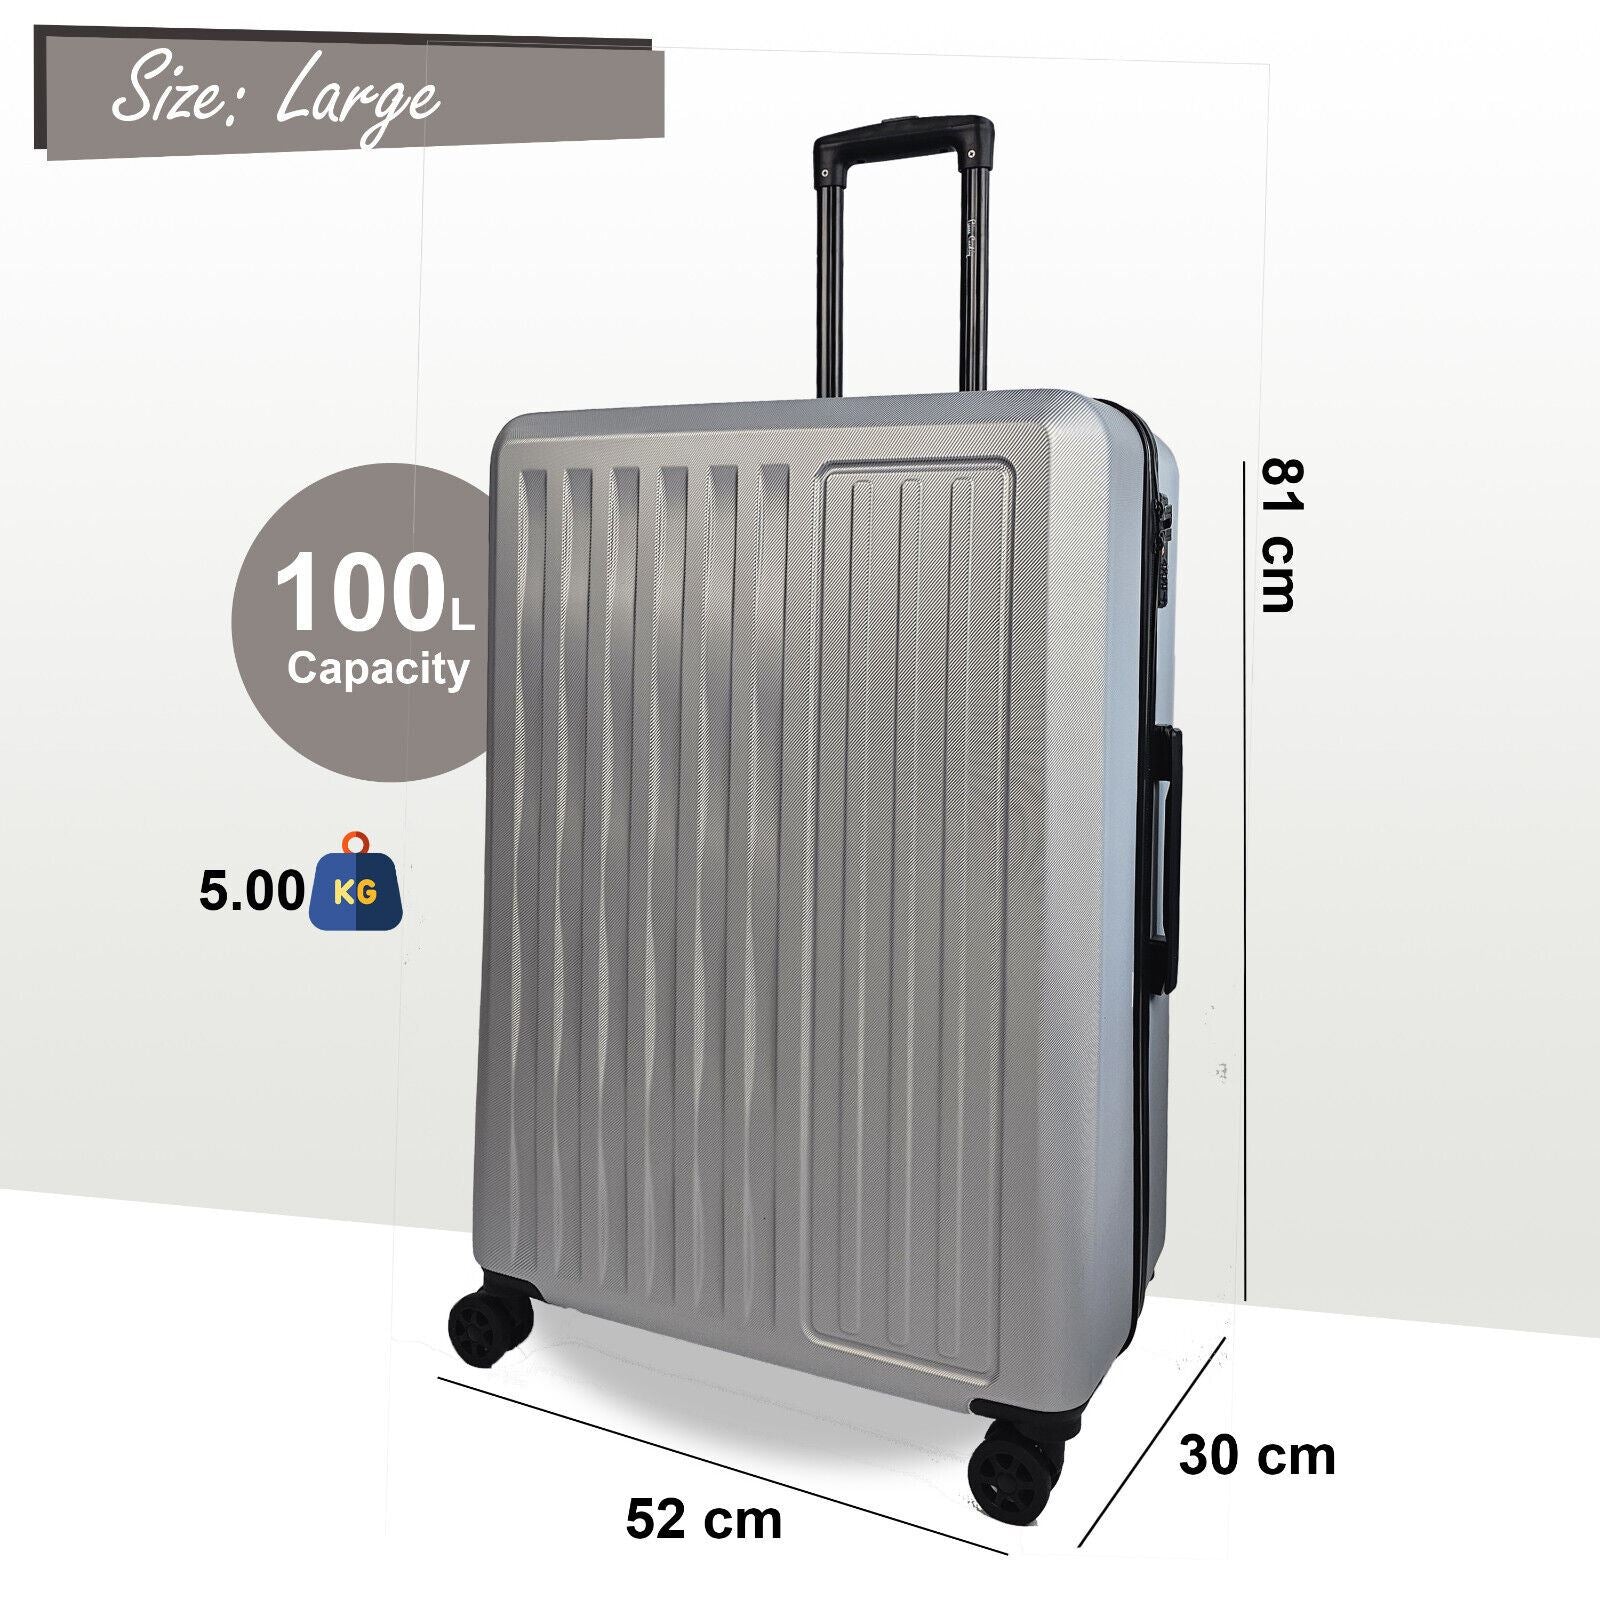 Cullman Large Hard Shell Suitcase in Silver